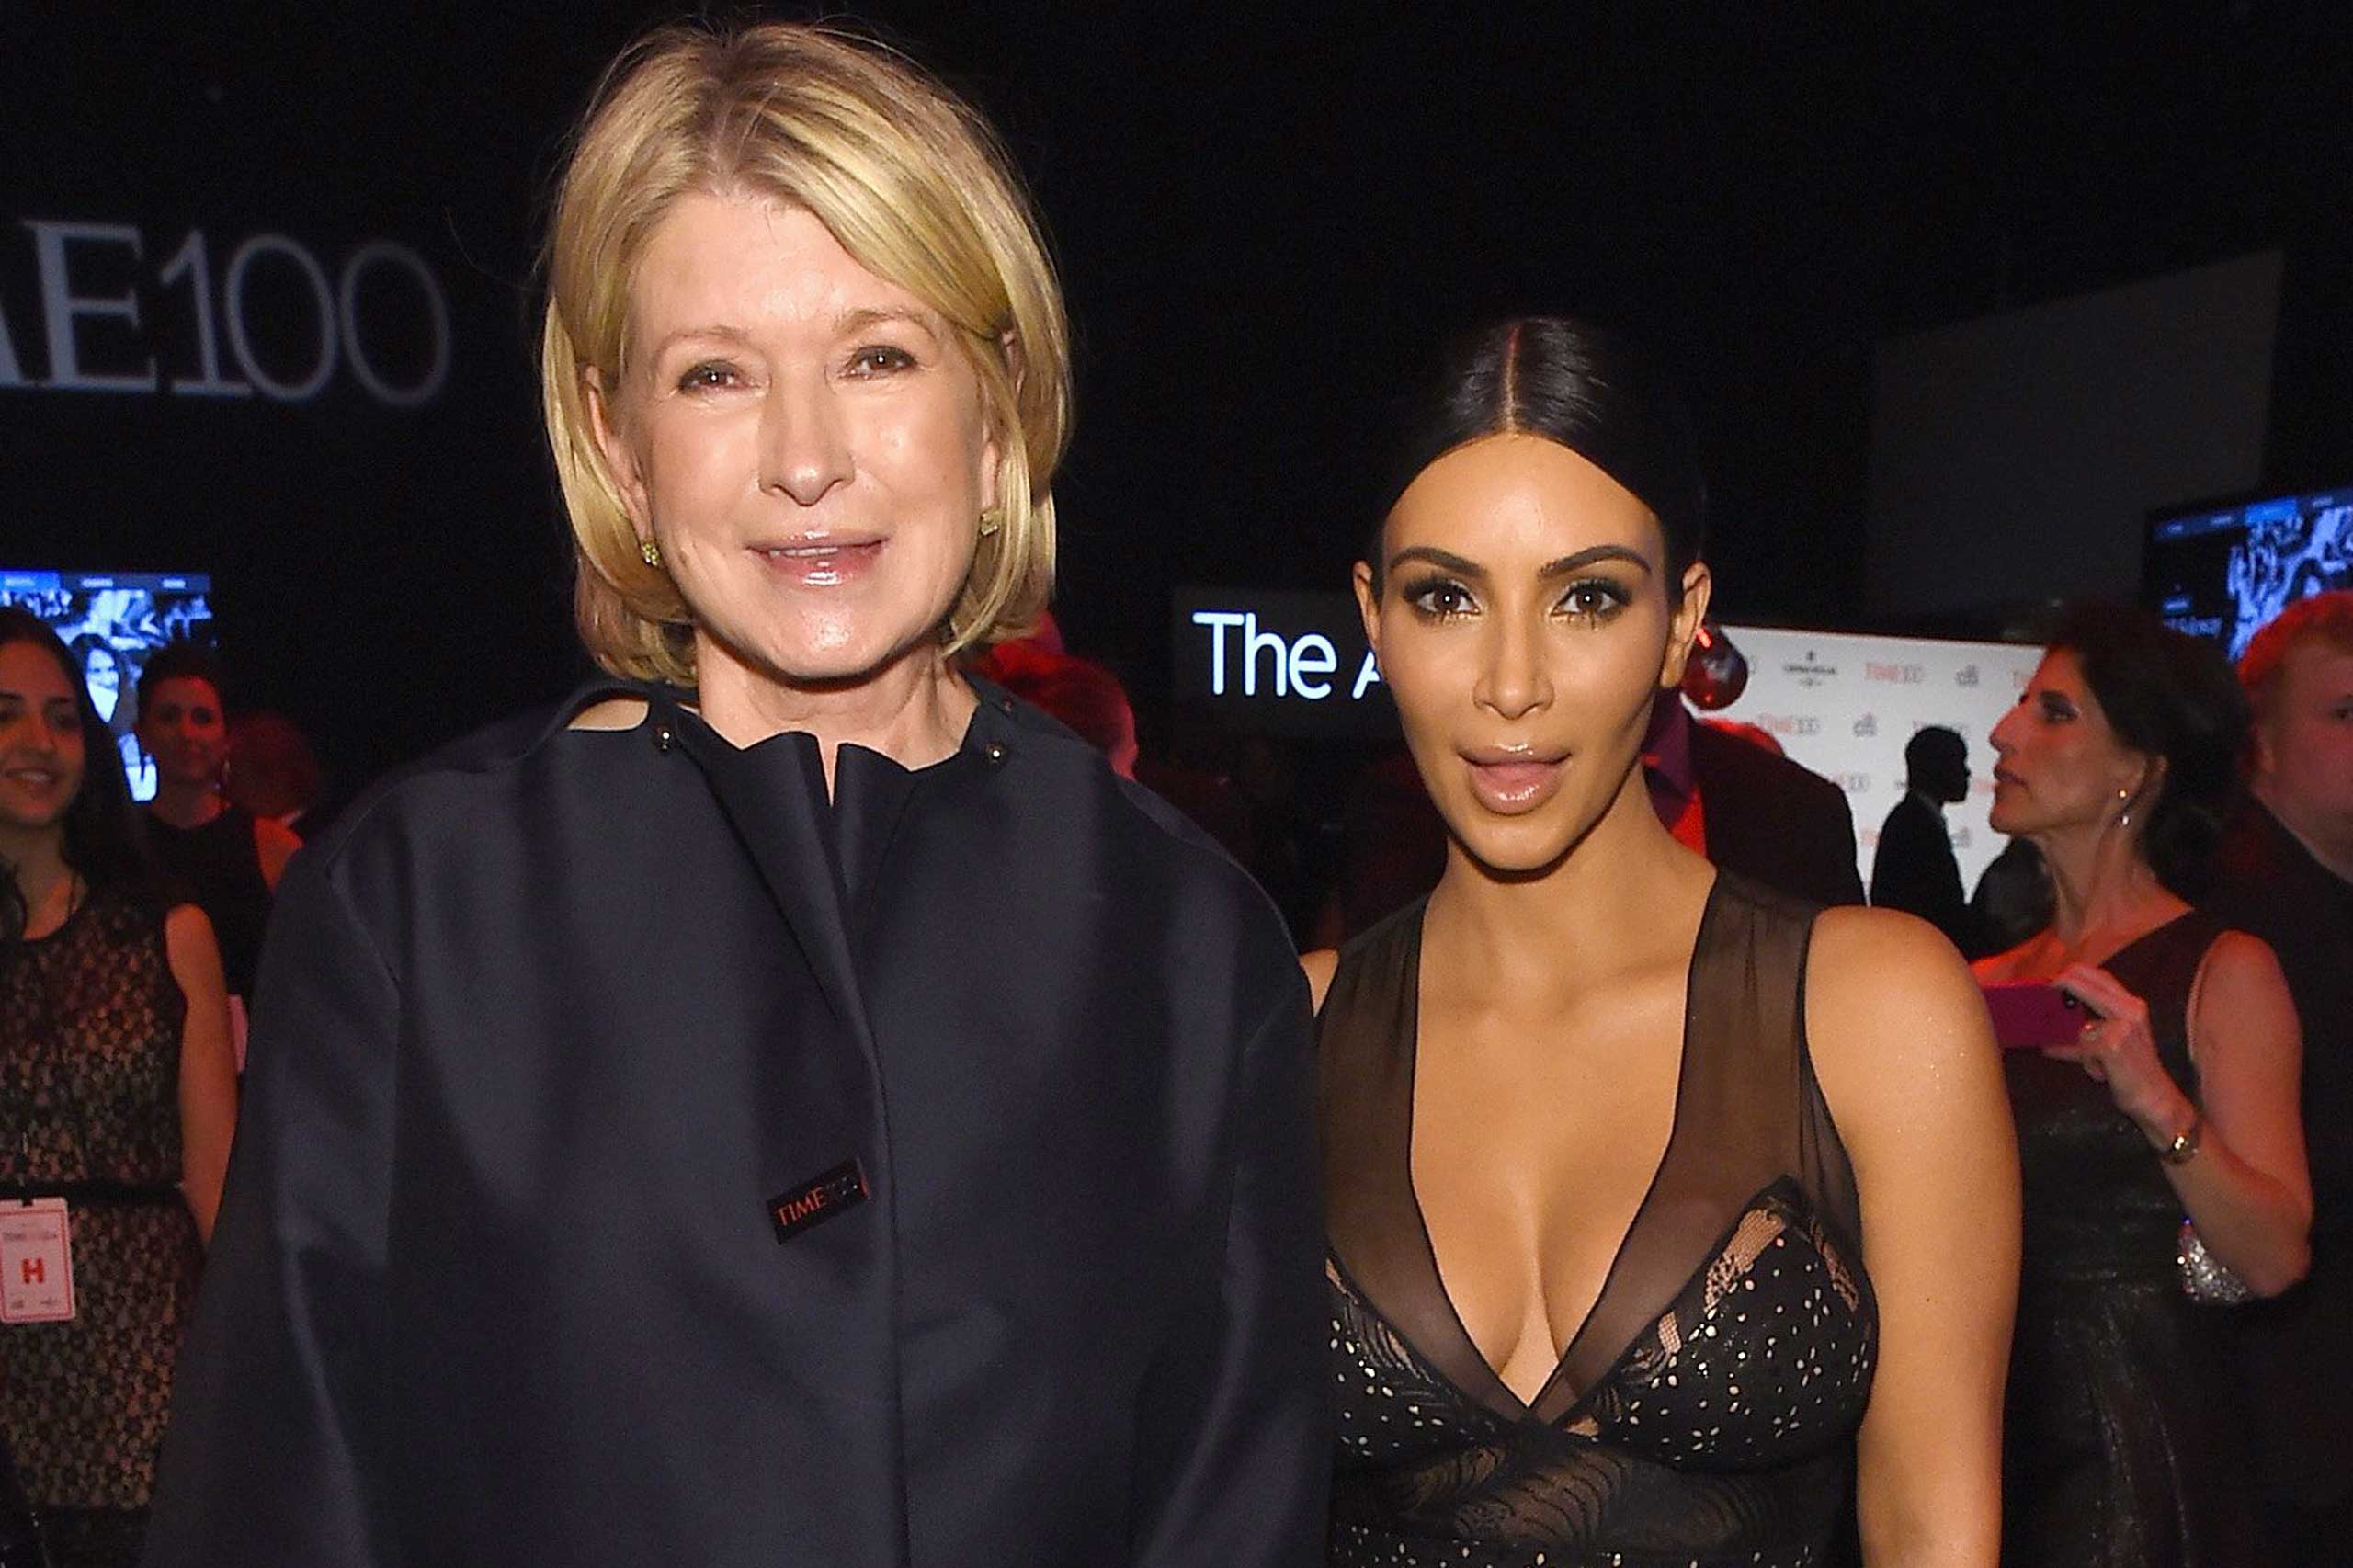 Martha Stewart and Kim Kardashian attend the TIME 100 Gala at Jazz at Lincoln Center in New York City on April 21, 2015. (Larry Busacca—Getty Images for TIME)